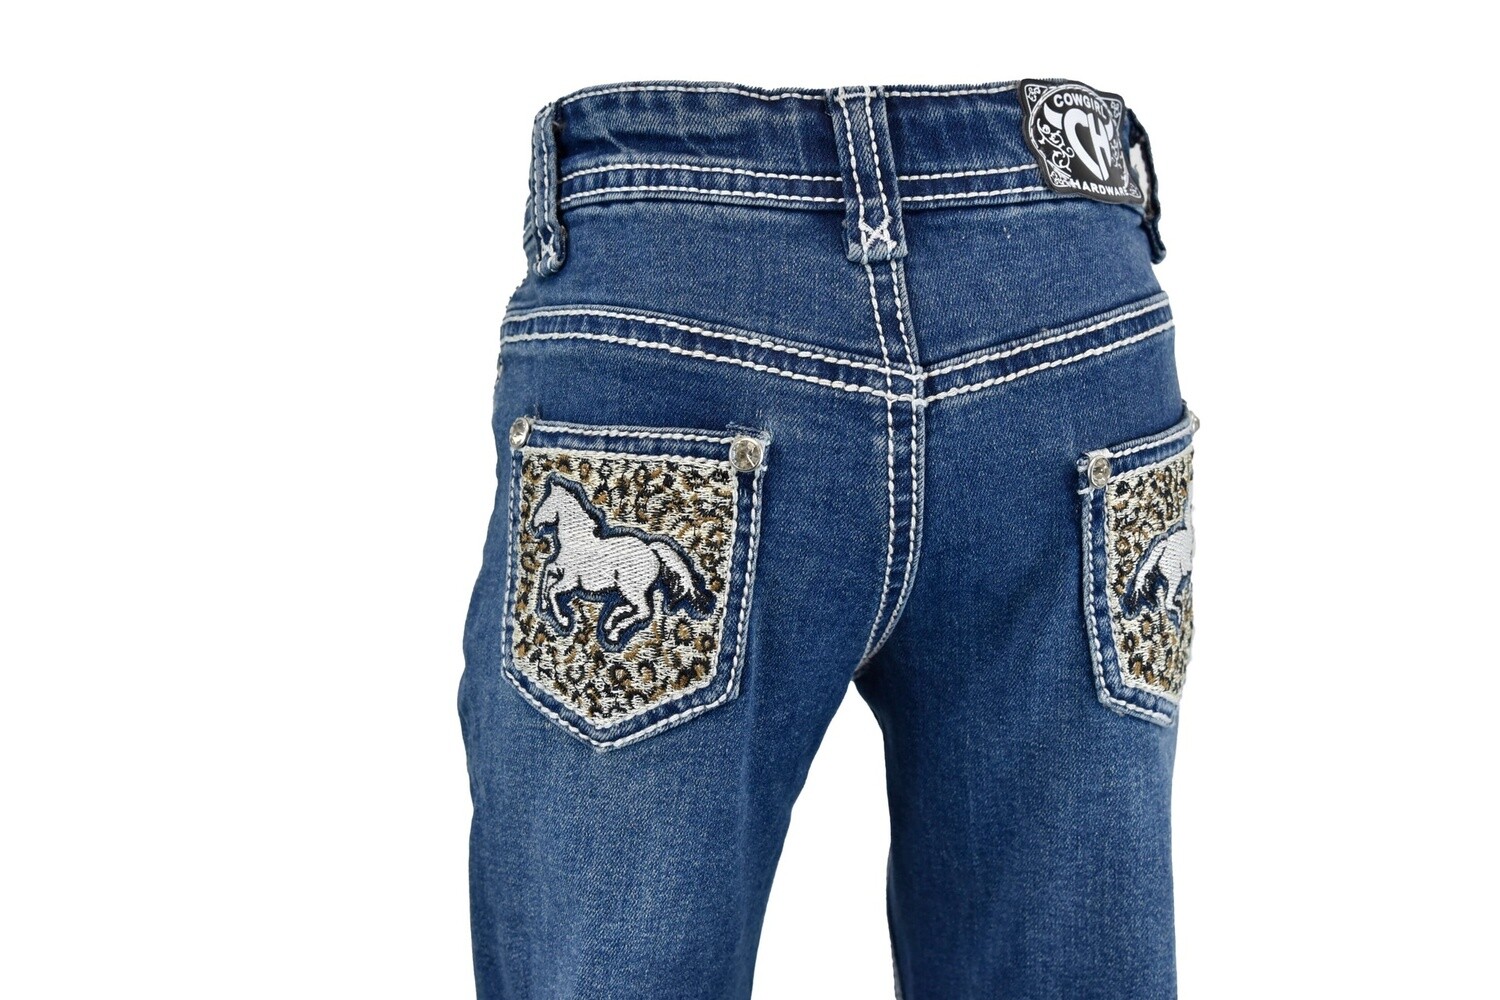 802137 GIRL'S COWGIRL HARDWARE LEOPARD/HORSE TODDLER JEAN